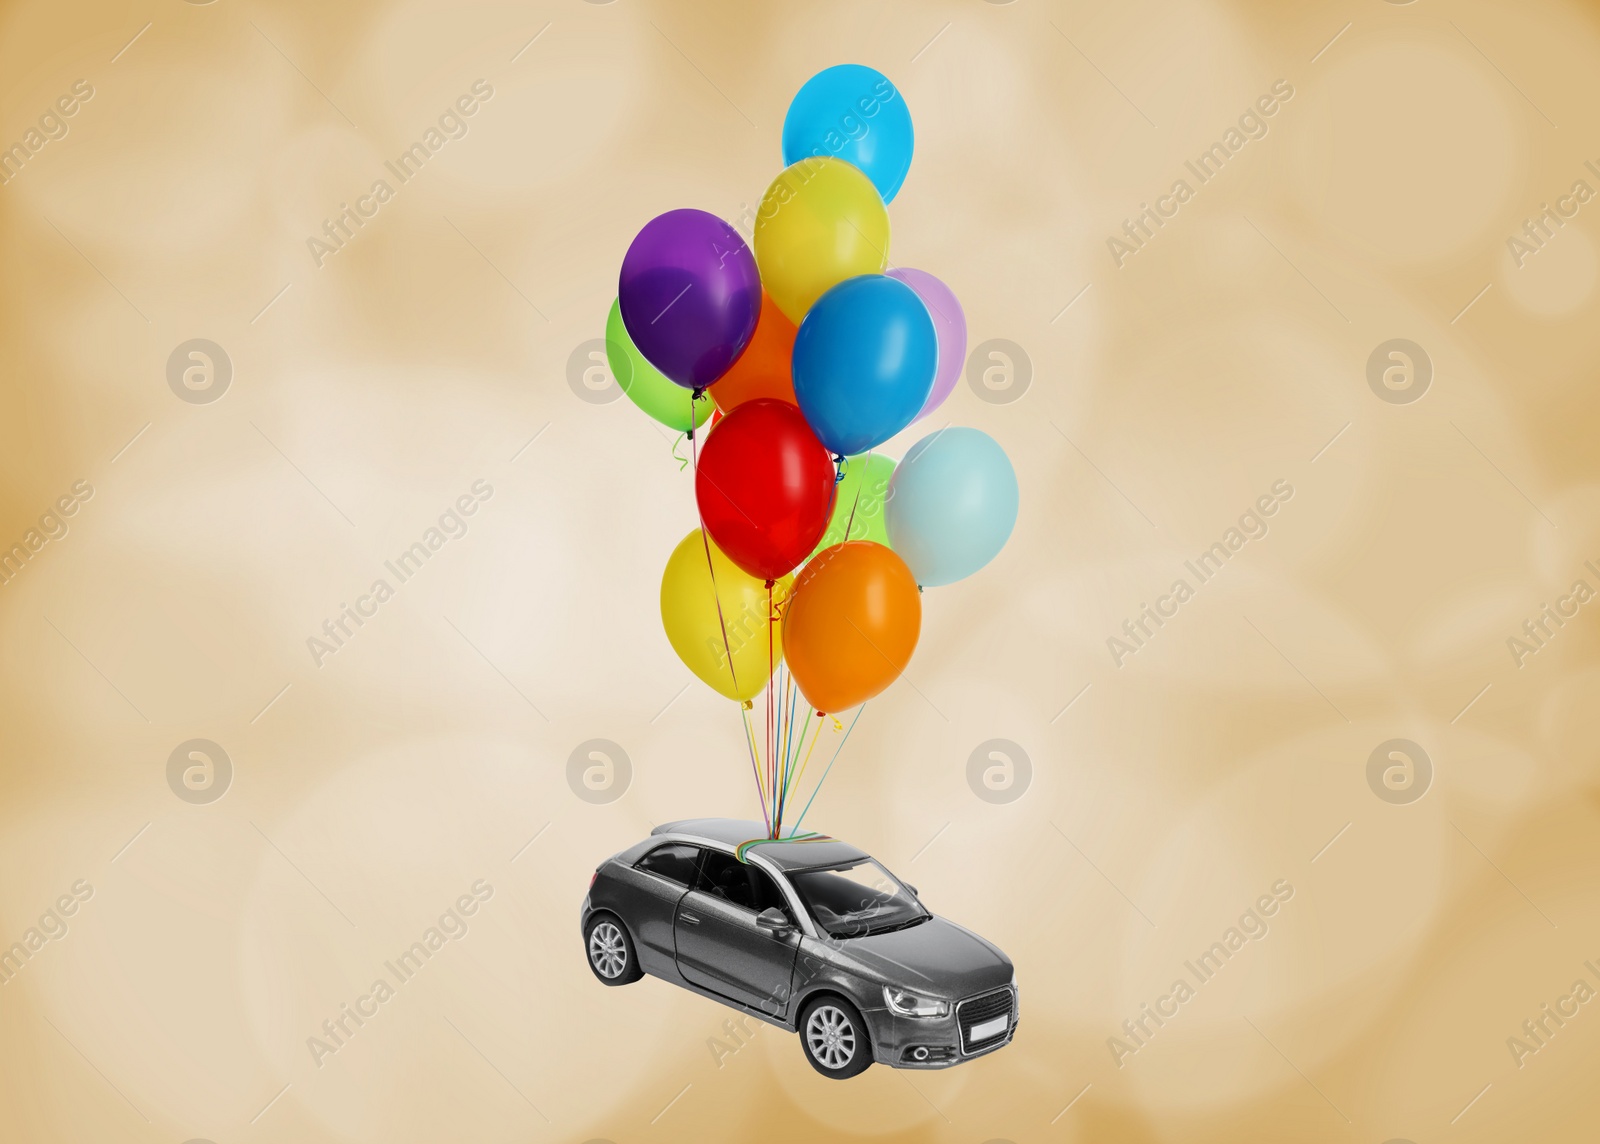 Image of Many balloons tied to toy car flying on golden background